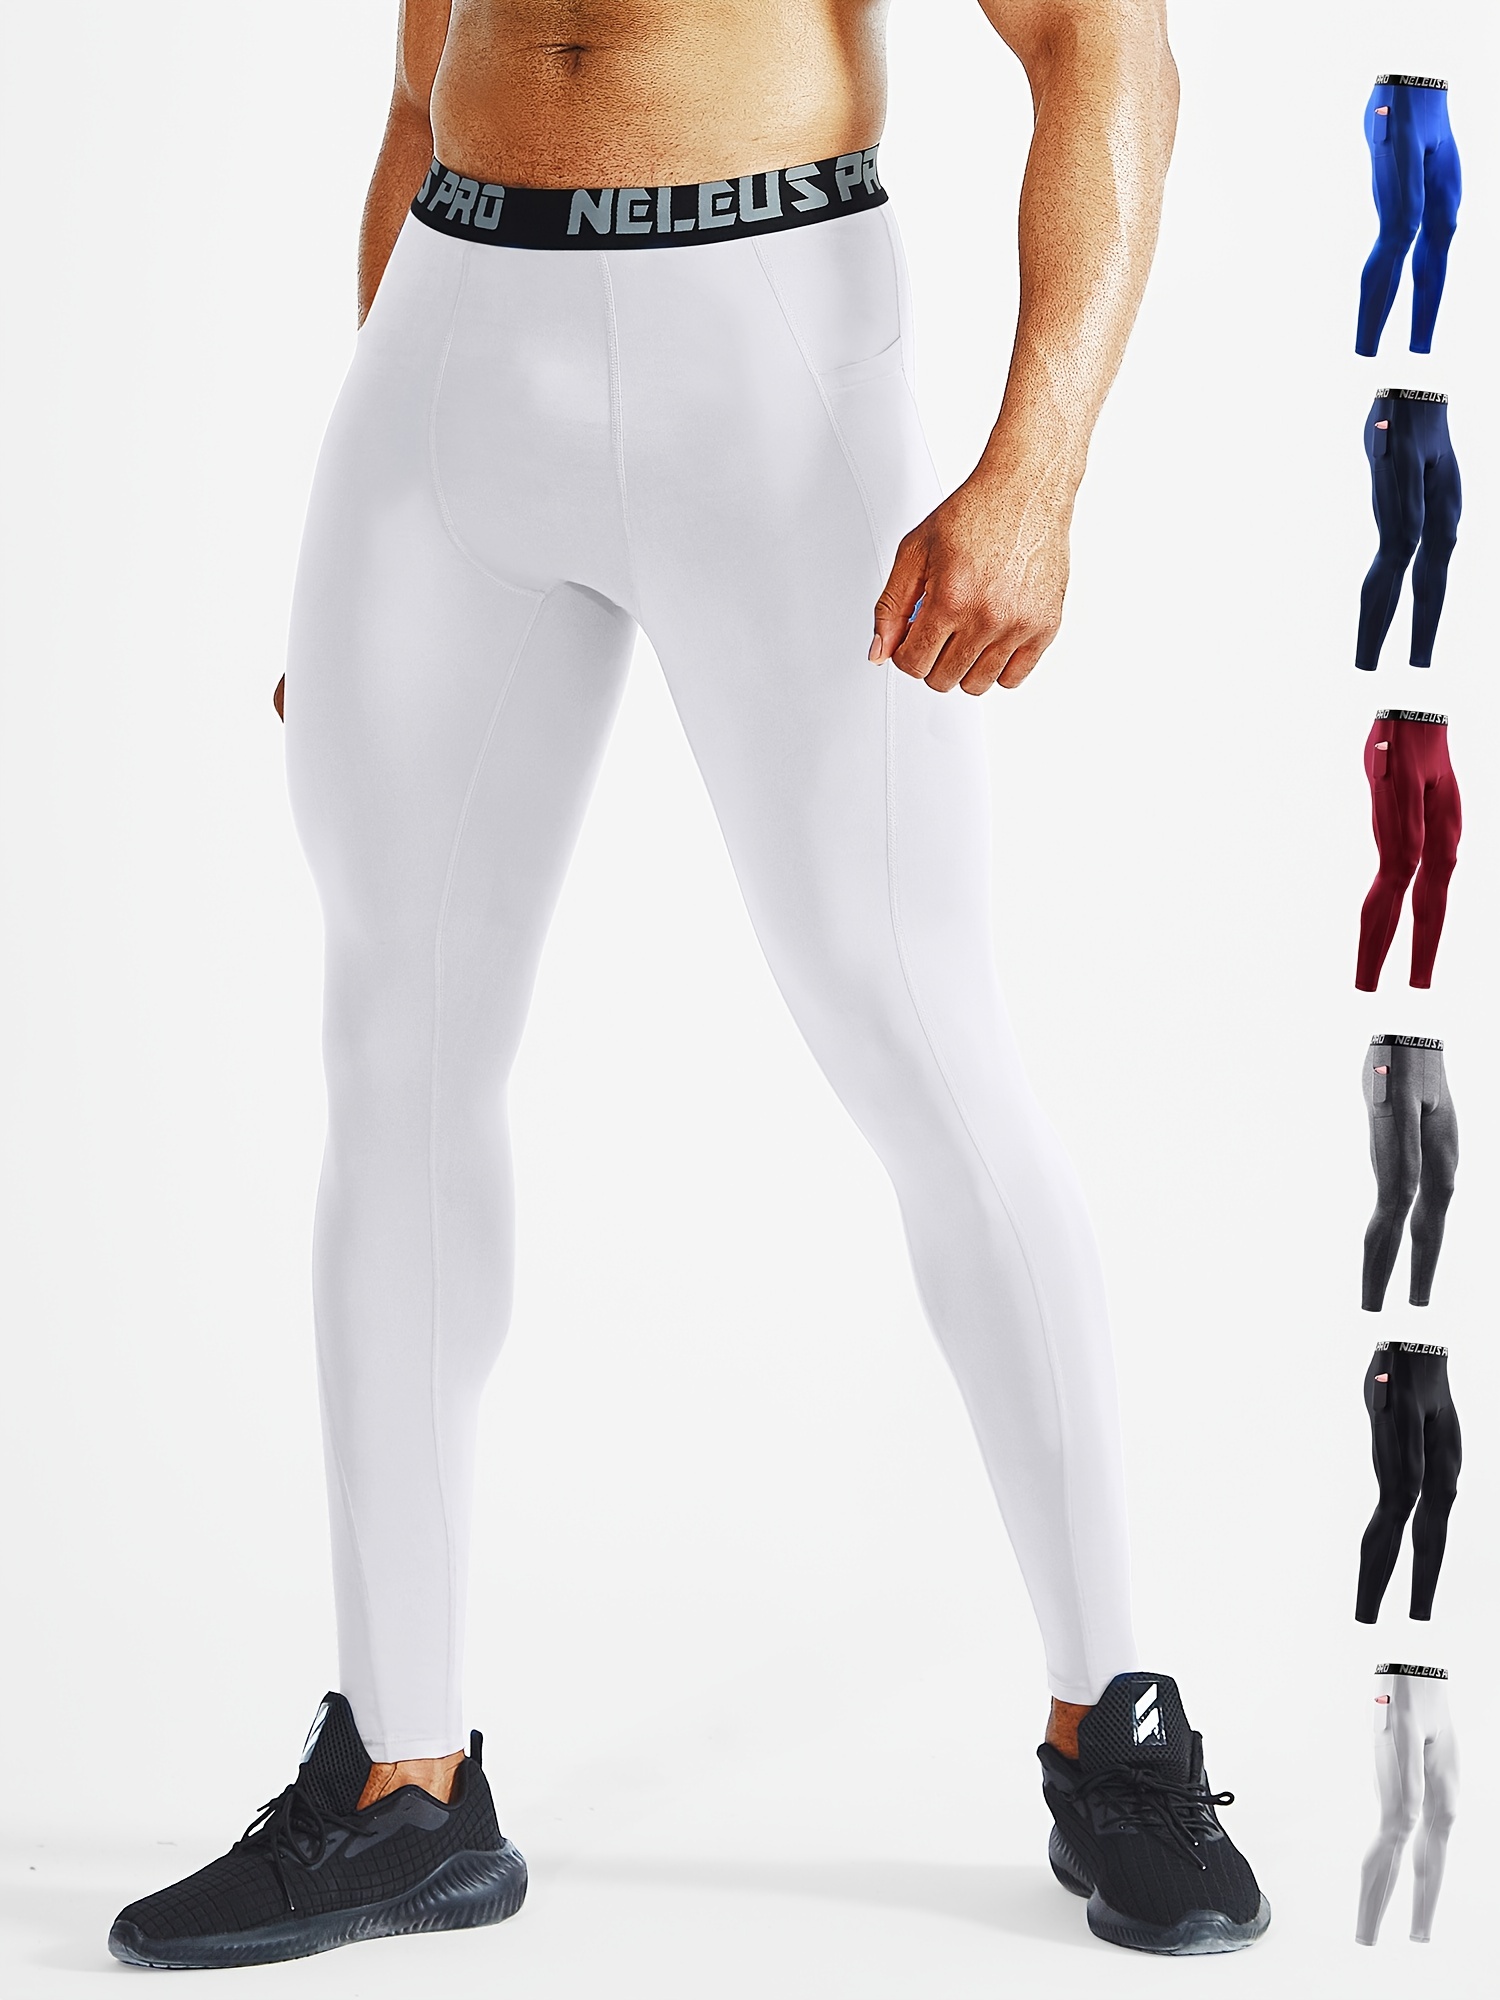 Men's Tight Sports Pants, Fitness Running Training Quick Drying And  Breathable Comfy Pants